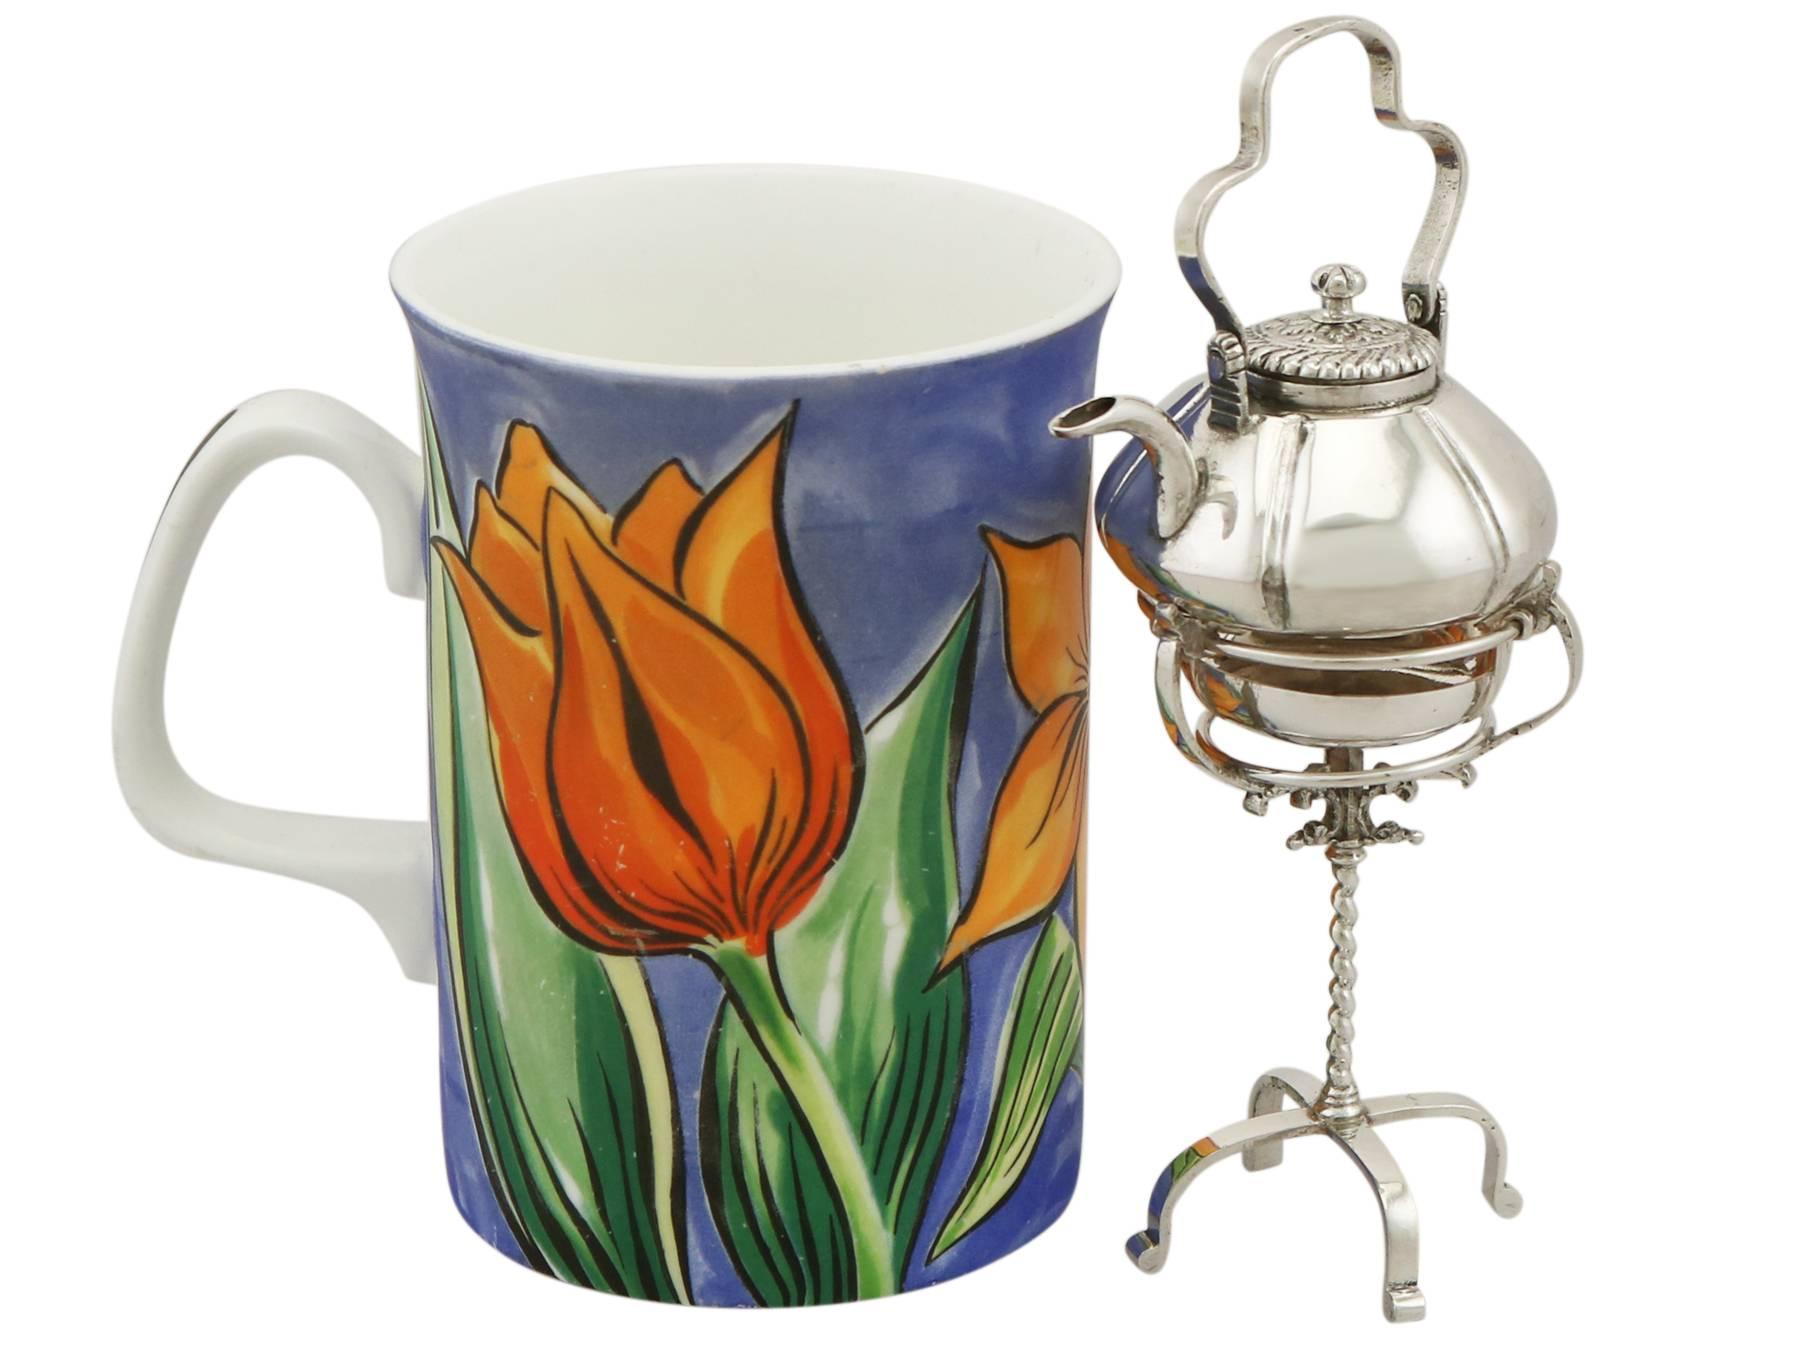 An exceptional, fine and impressive antique 18th century Dutch silver miniature spirit kettle; an addition to our diverse silver teaware collection

This exceptional antique Dutch silver miniature spirit kettle has a pumpkin shaped form.

Each